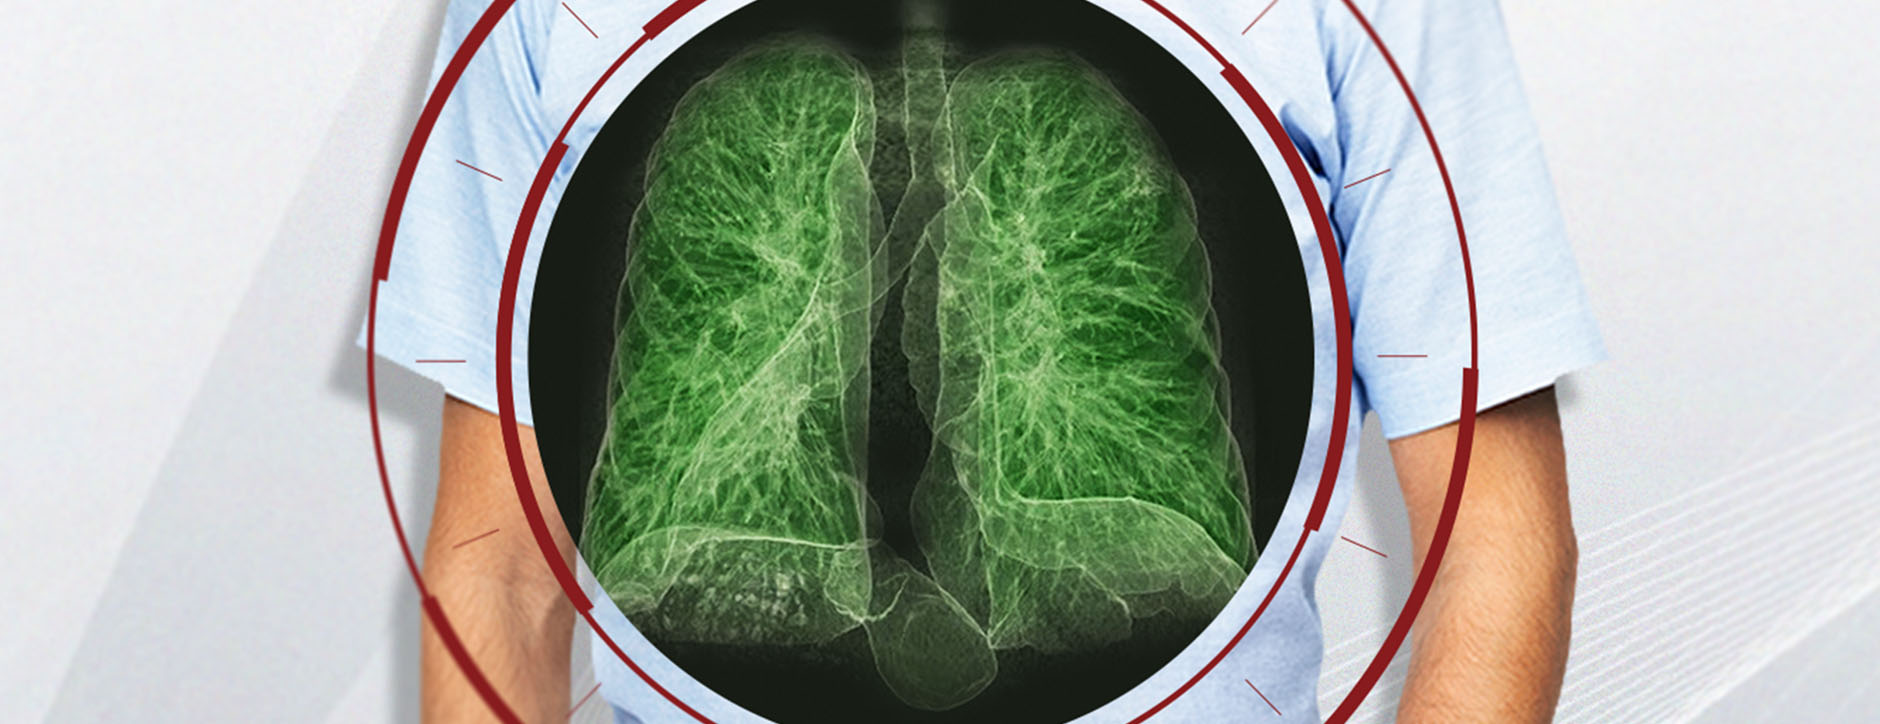 Low-Dose CT Lung Cancer Screening